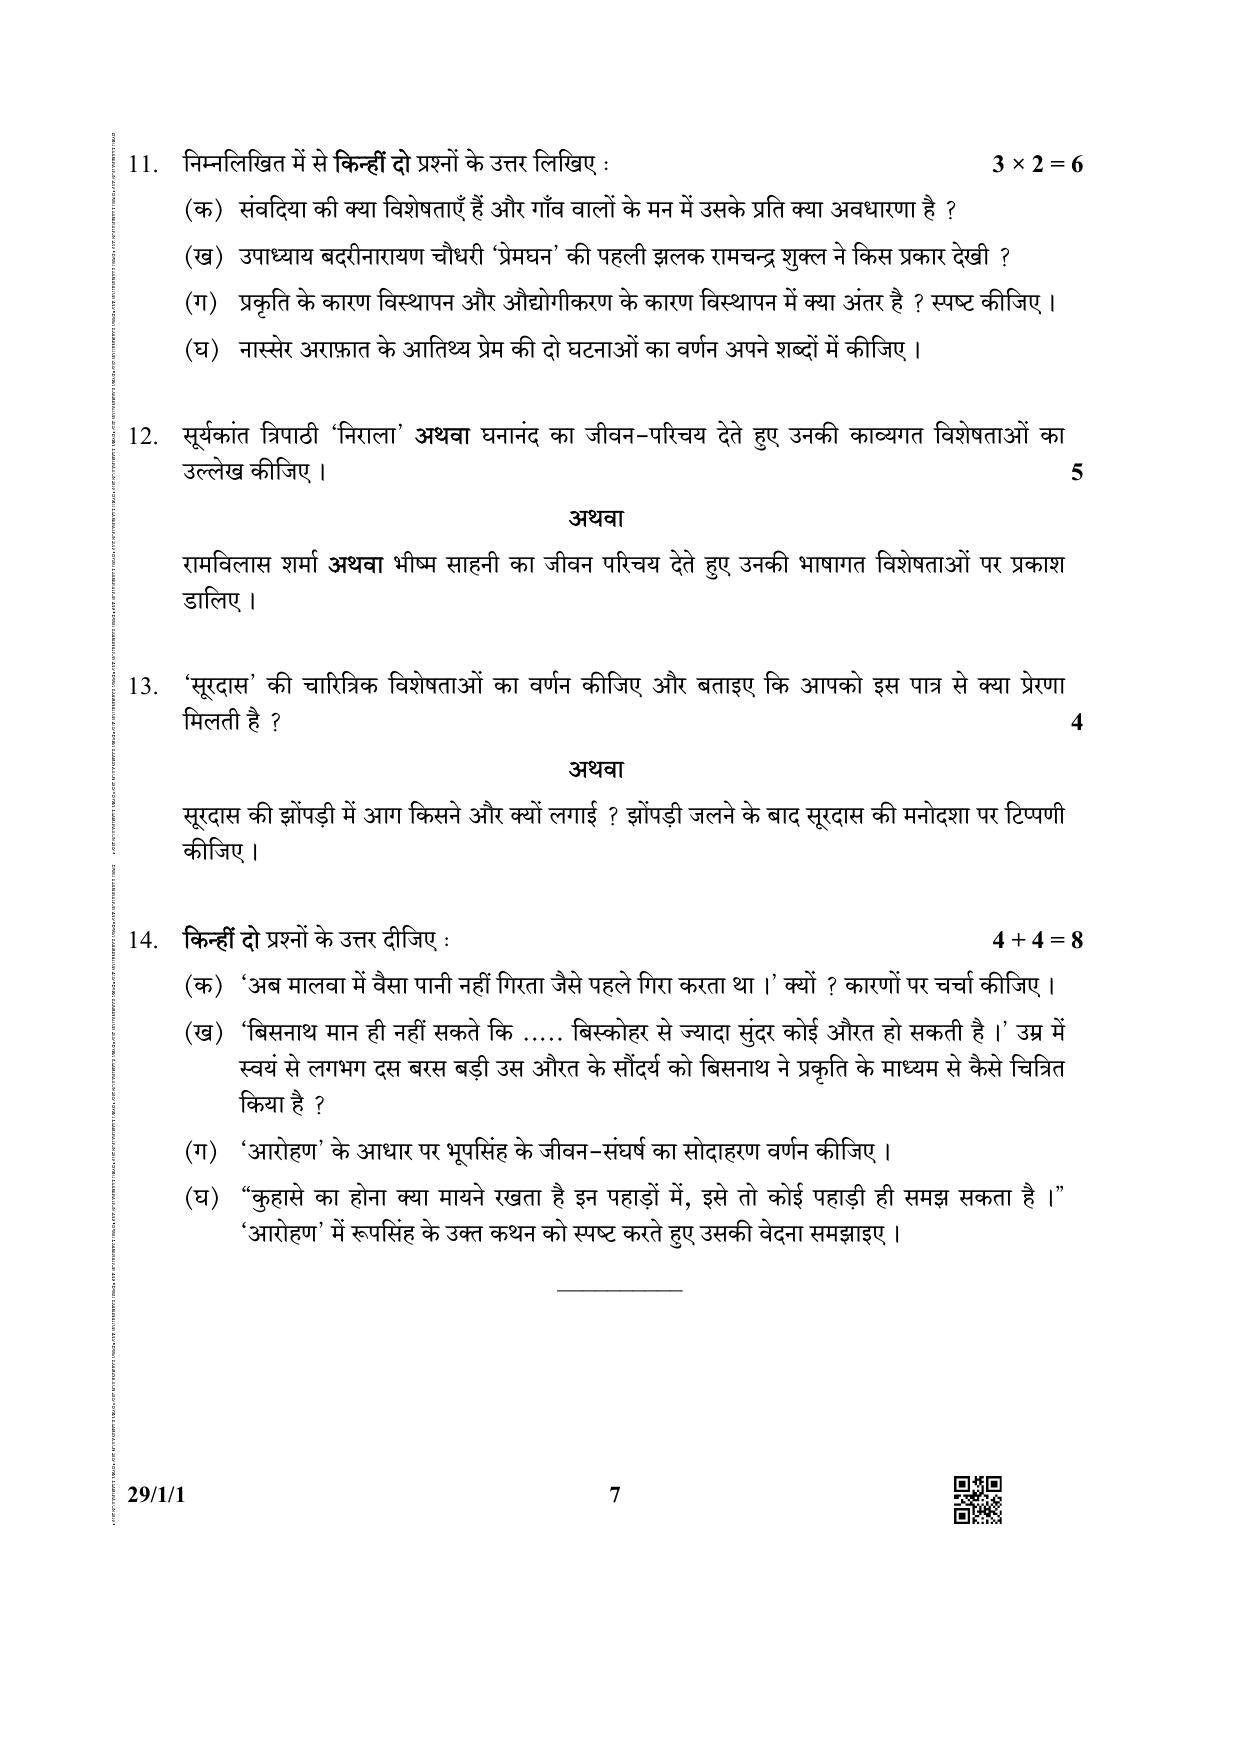 CBSE Class 12 29-1-1 (Hindi ELECTIVE) 2019 Question Paper - Page 7